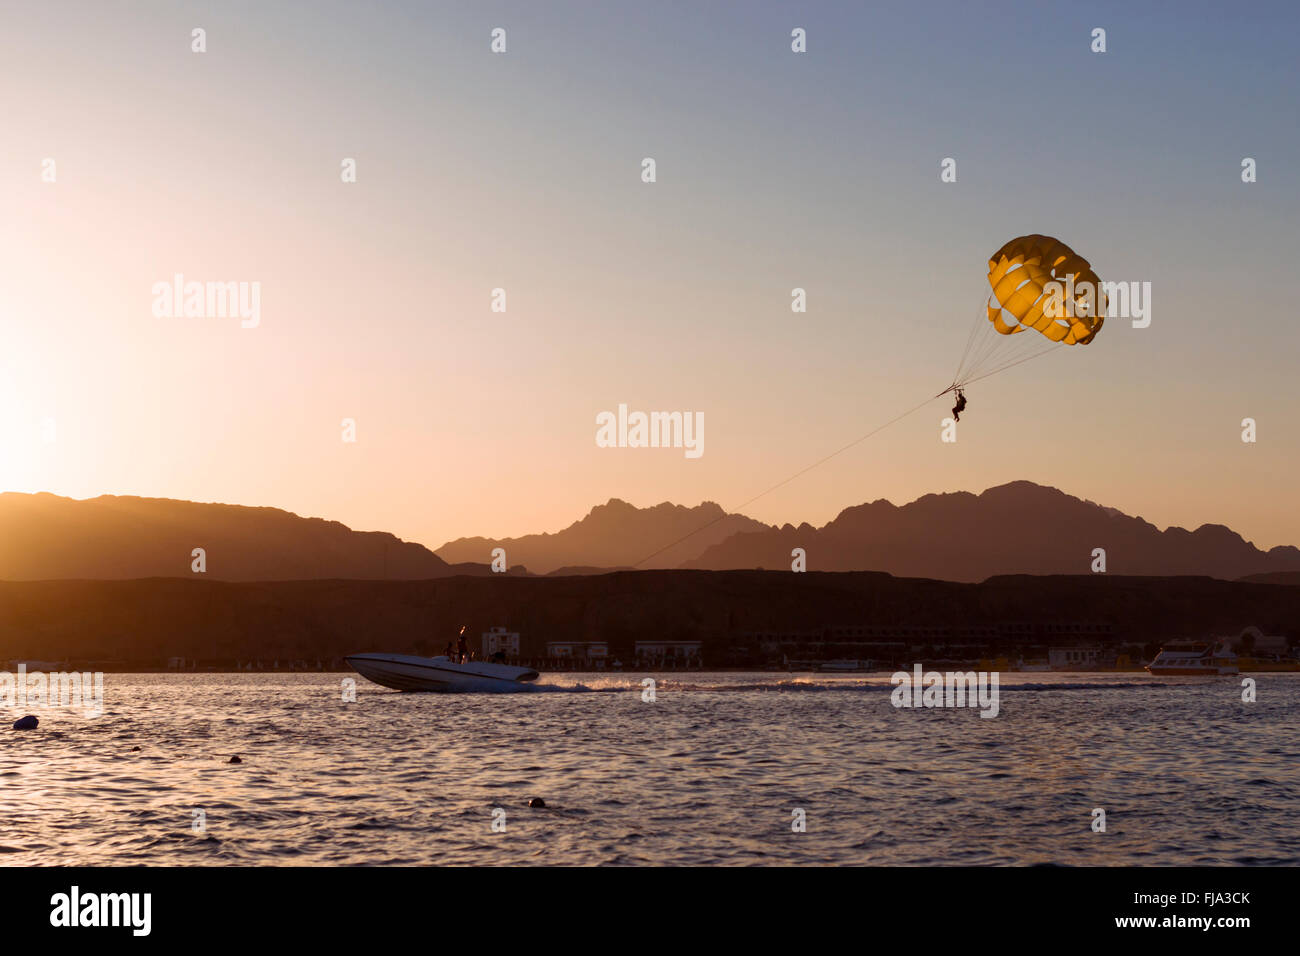 SHARM EL SHEIKH, EGYPT - FEBRUARY 28, 2014: Parachuting over a sea, towing by a boat: happy people is flying on a parachute Stock Photo